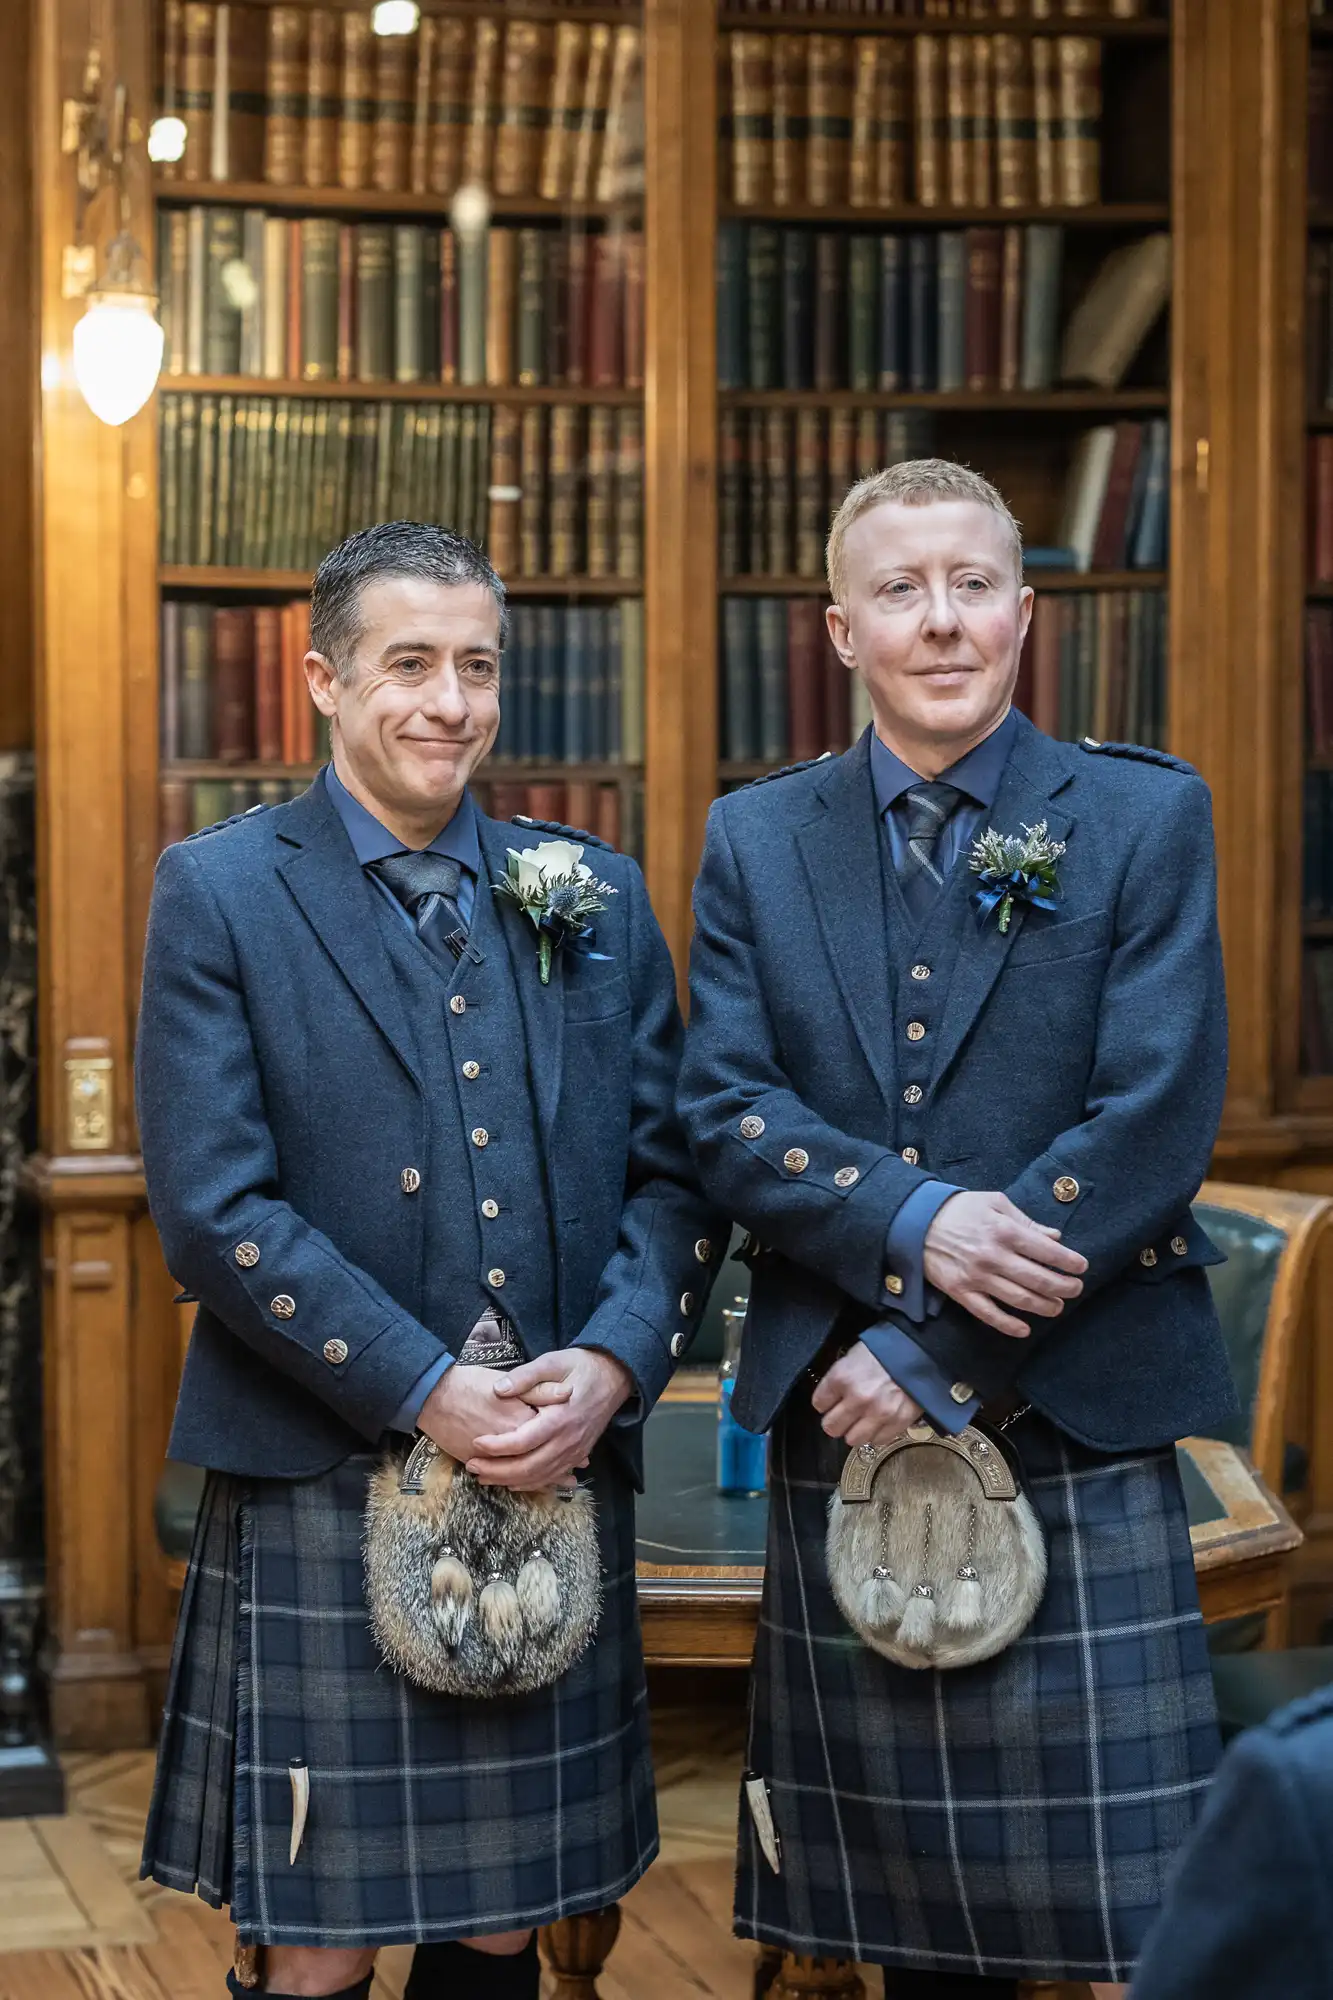 Two men in blue kilts stand side by side in a wood-paneled room with bookshelves in the background, both smiling.